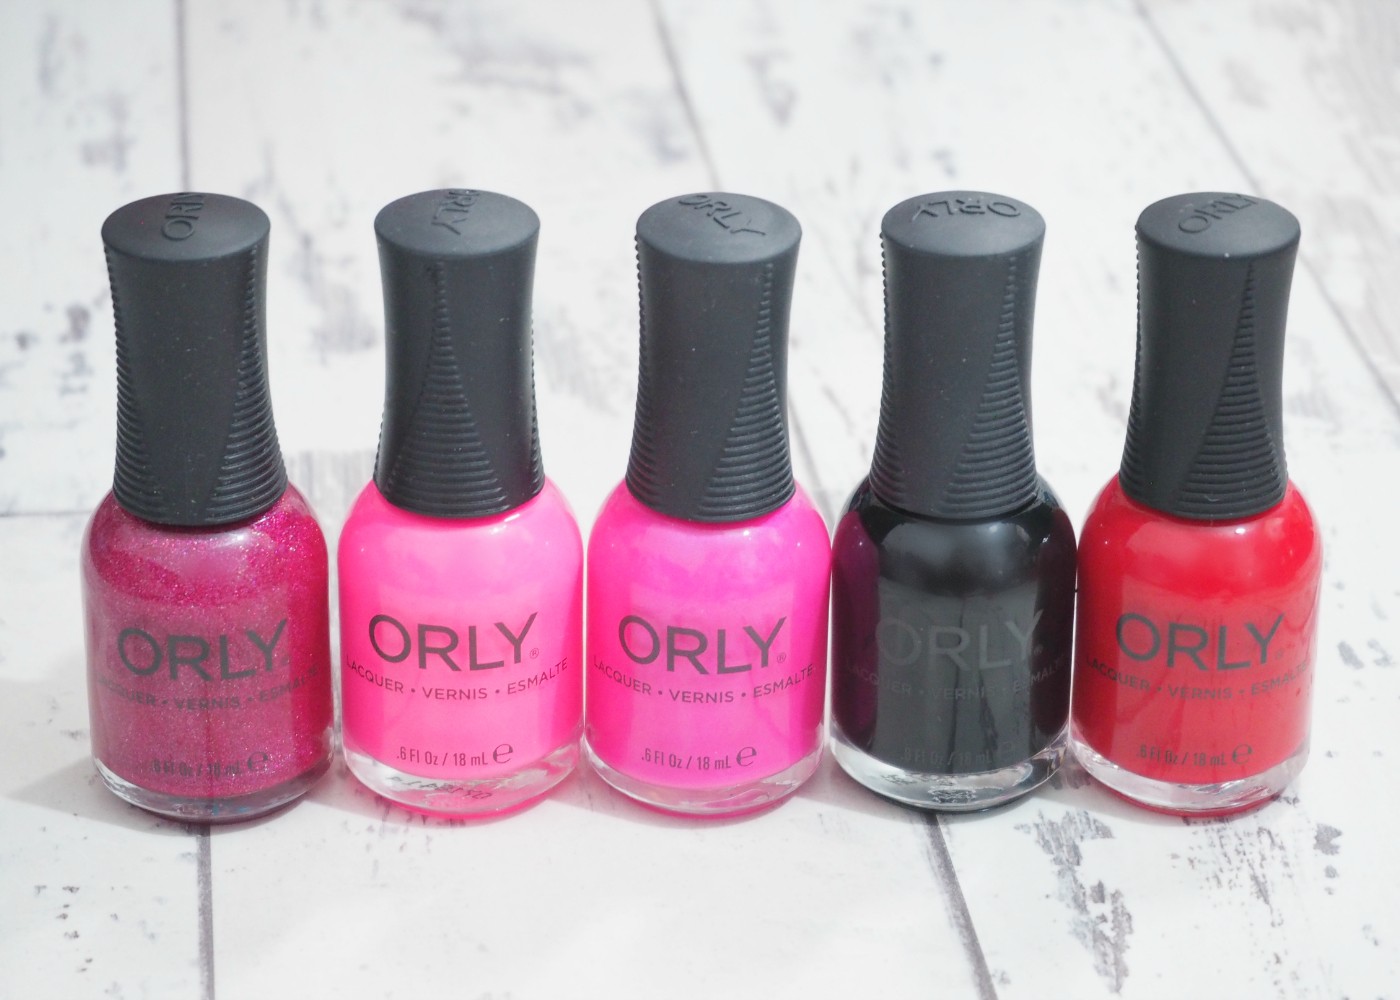 10. Orly Nail Lacquer in "Orange Punch" - wide 5